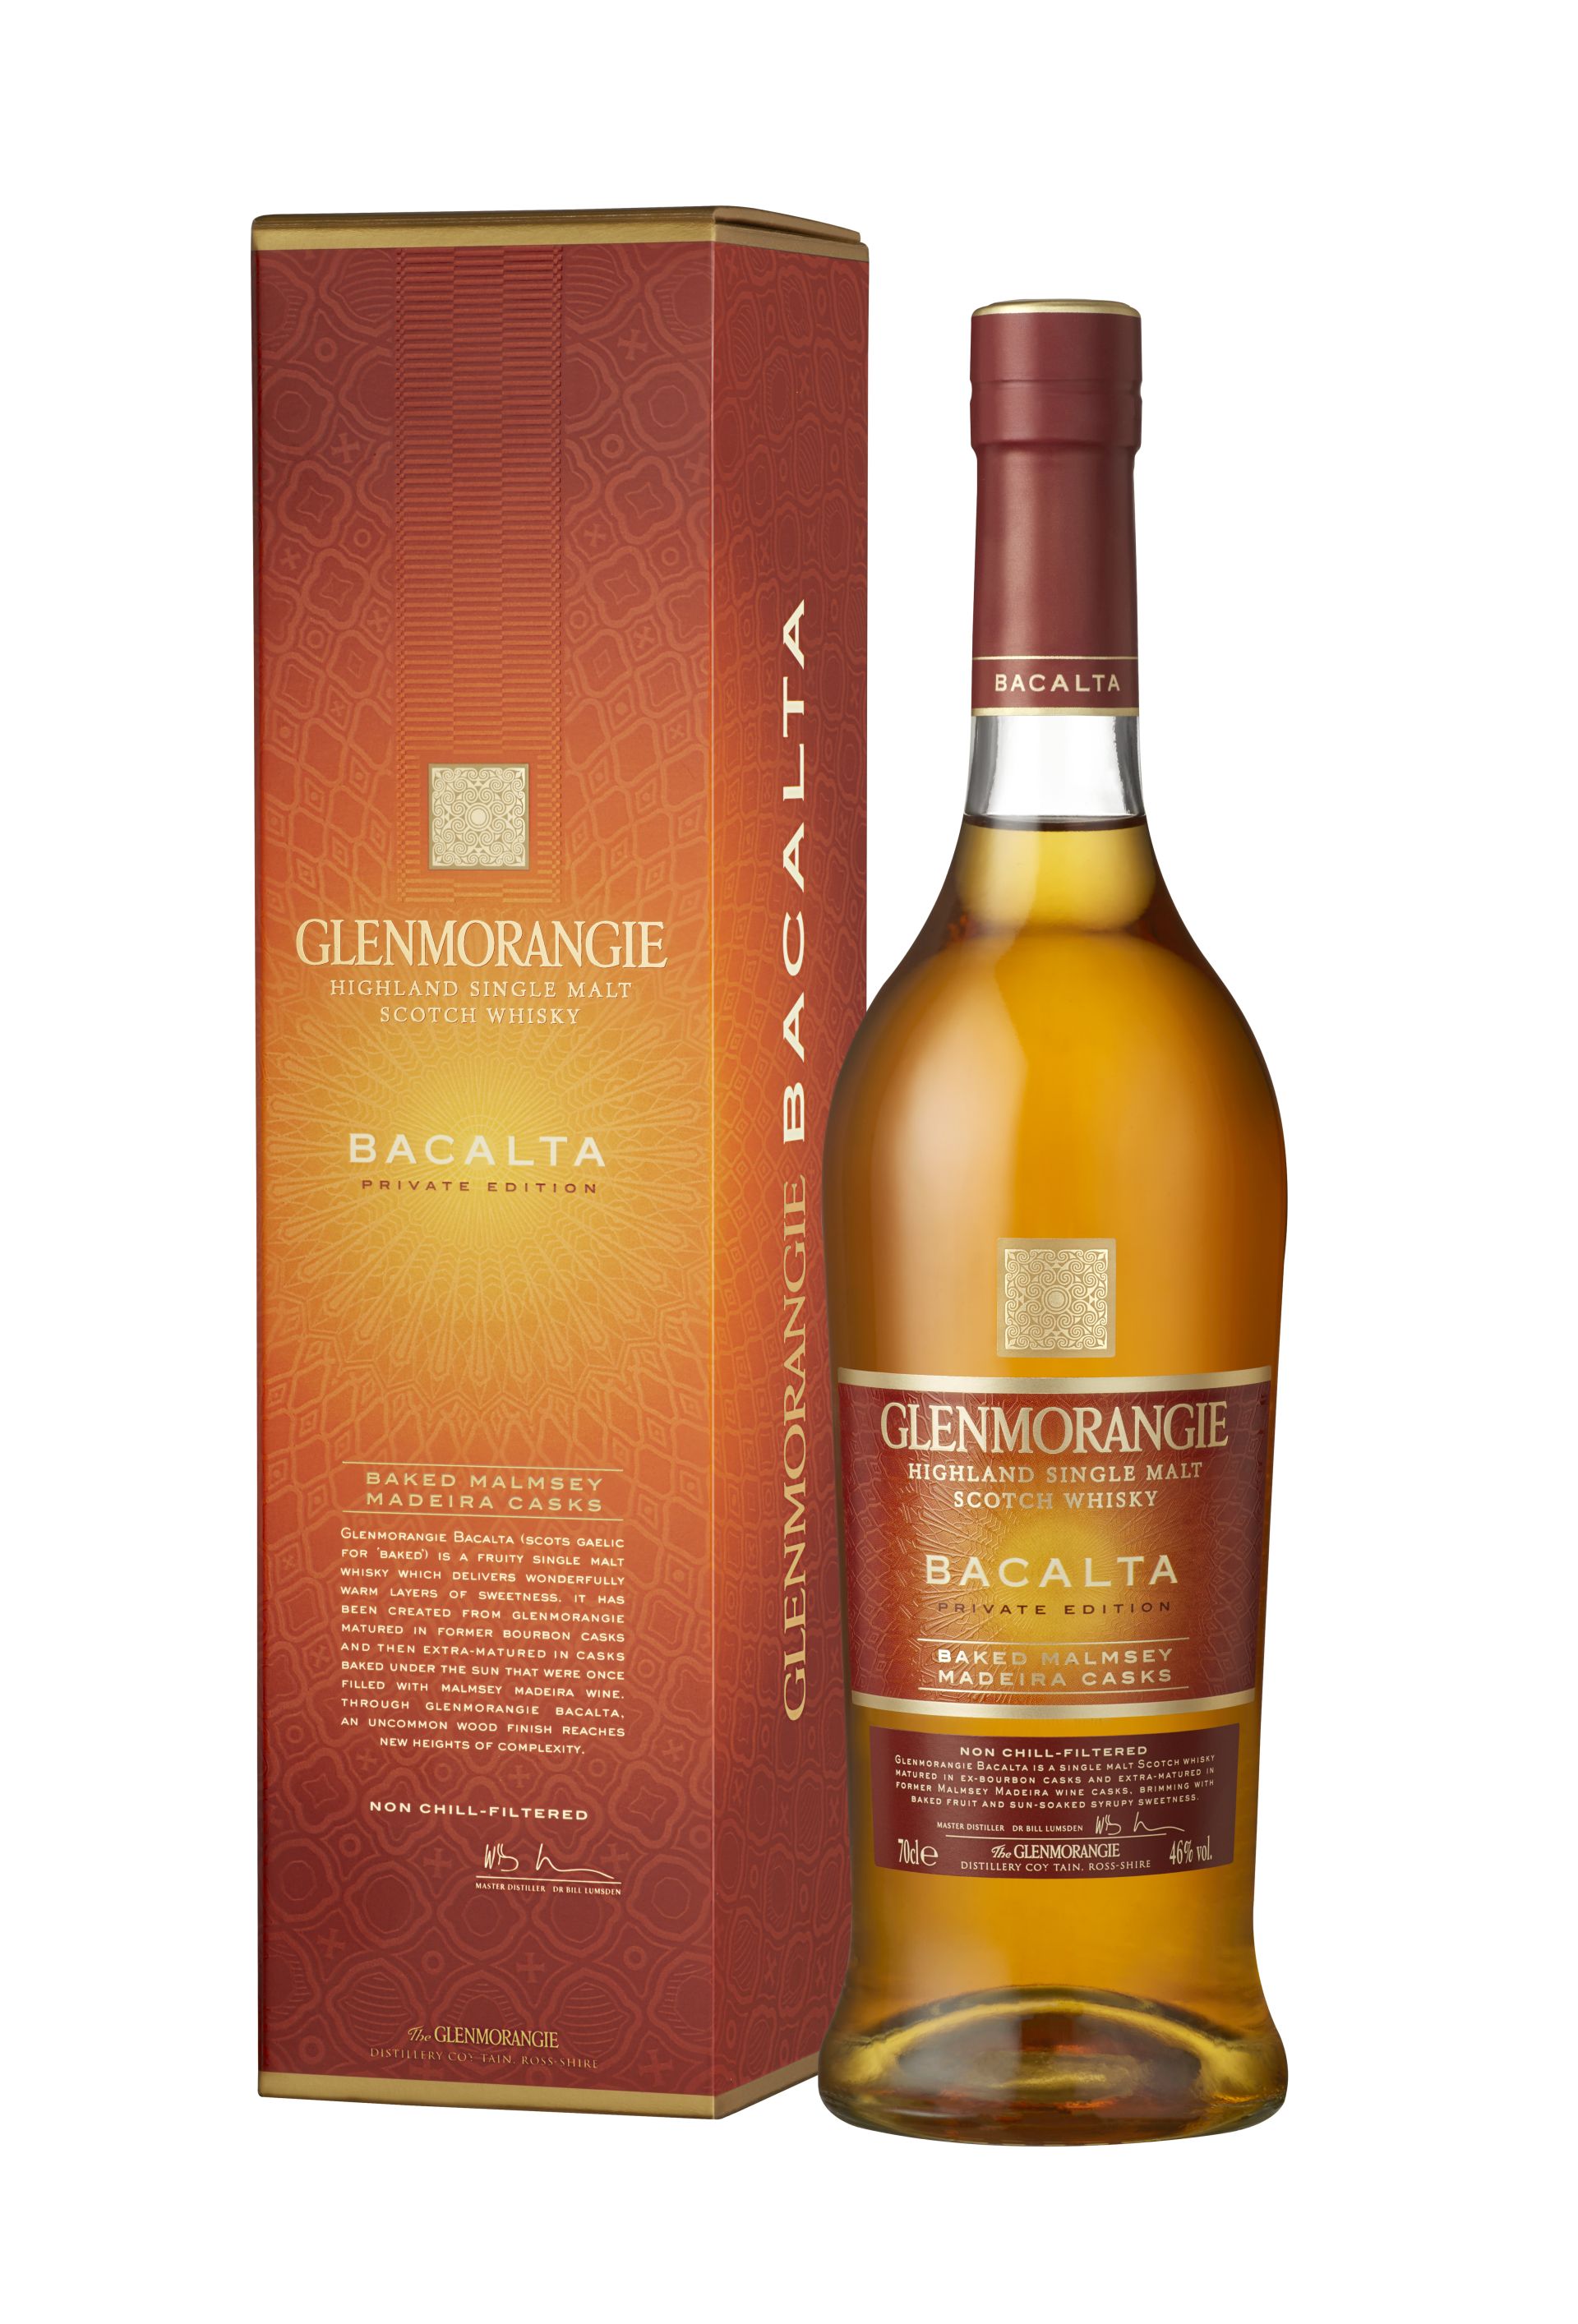 Glenmorangie Bacalta Private Edition Whisky